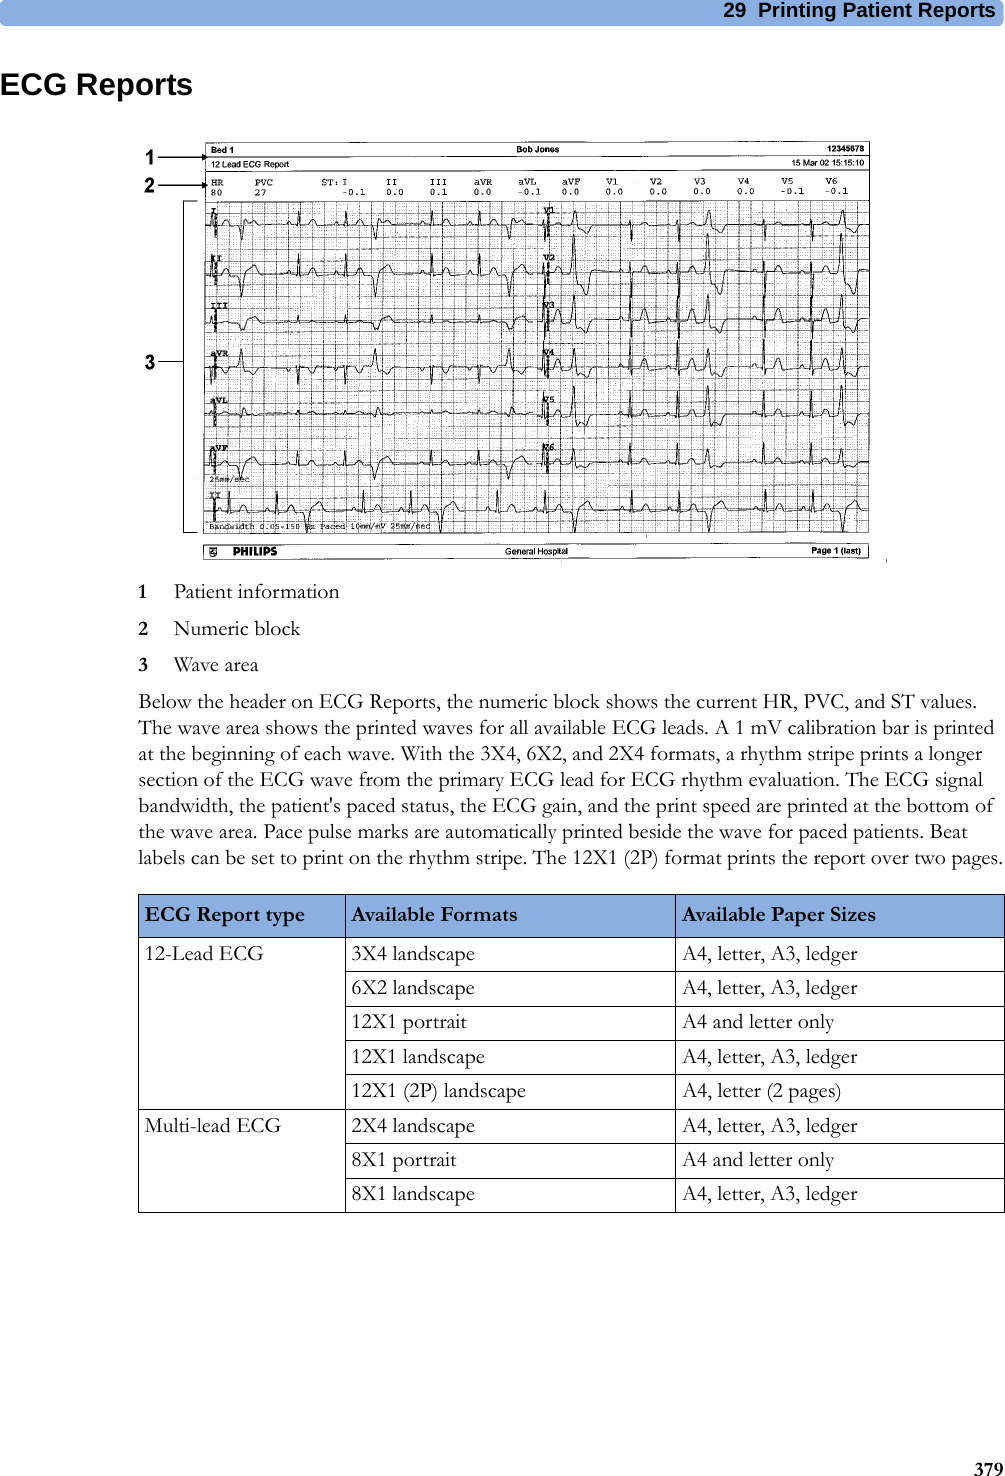 29 Printing Patient Reports379ECG Reports1Patient information2Numeric block3Wave areaBelow the header on ECG Reports, the numeric block shows the current HR, PVC, and ST values. The wave area shows the printed waves for all available ECG leads. A 1 mV calibration bar is printed at the beginning of each wave. With the 3X4, 6X2, and 2X4 formats, a rhythm stripe prints a longer section of the ECG wave from the primary ECG lead for ECG rhythm evaluation. The ECG signal bandwidth, the patient&apos;s paced status, the ECG gain, and the print speed are printed at the bottom of the wave area. Pace pulse marks are automatically printed beside the wave for paced patients. Beat labels can be set to print on the rhythm stripe. The 12X1 (2P) format prints the report over two pages.ECG Report type Available Formats Available Paper Sizes12-Lead ECG 3X4 landscape A4, letter, A3, ledger6X2 landscape A4, letter, A3, ledger12X1 portrait A4 and letter only12X1 landscape A4, letter, A3, ledger12X1 (2P) landscape A4, letter (2 pages)Multi-lead ECG 2X4 landscape A4, letter, A3, ledger8X1 portrait A4 and letter only8X1 landscape A4, letter, A3, ledger